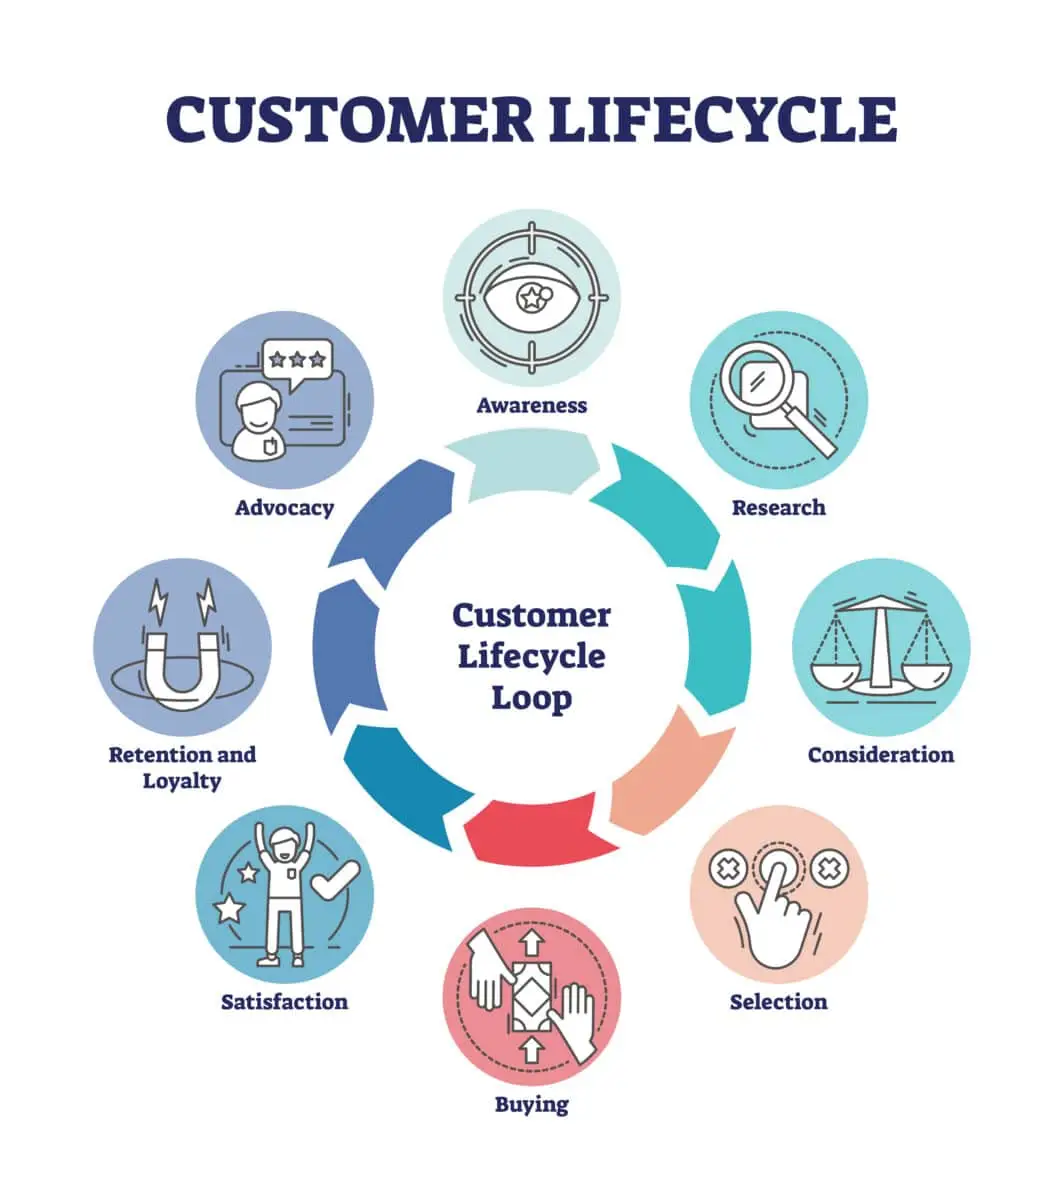 Graphic in the shape of a circle called the Customer Lifecycle Loop. There are the stages of the lifecycle listed on the graphic: Awareness, Research, Consideration, Selection, Buying, Satisfaction, Retention and Loyalty, Advocacy